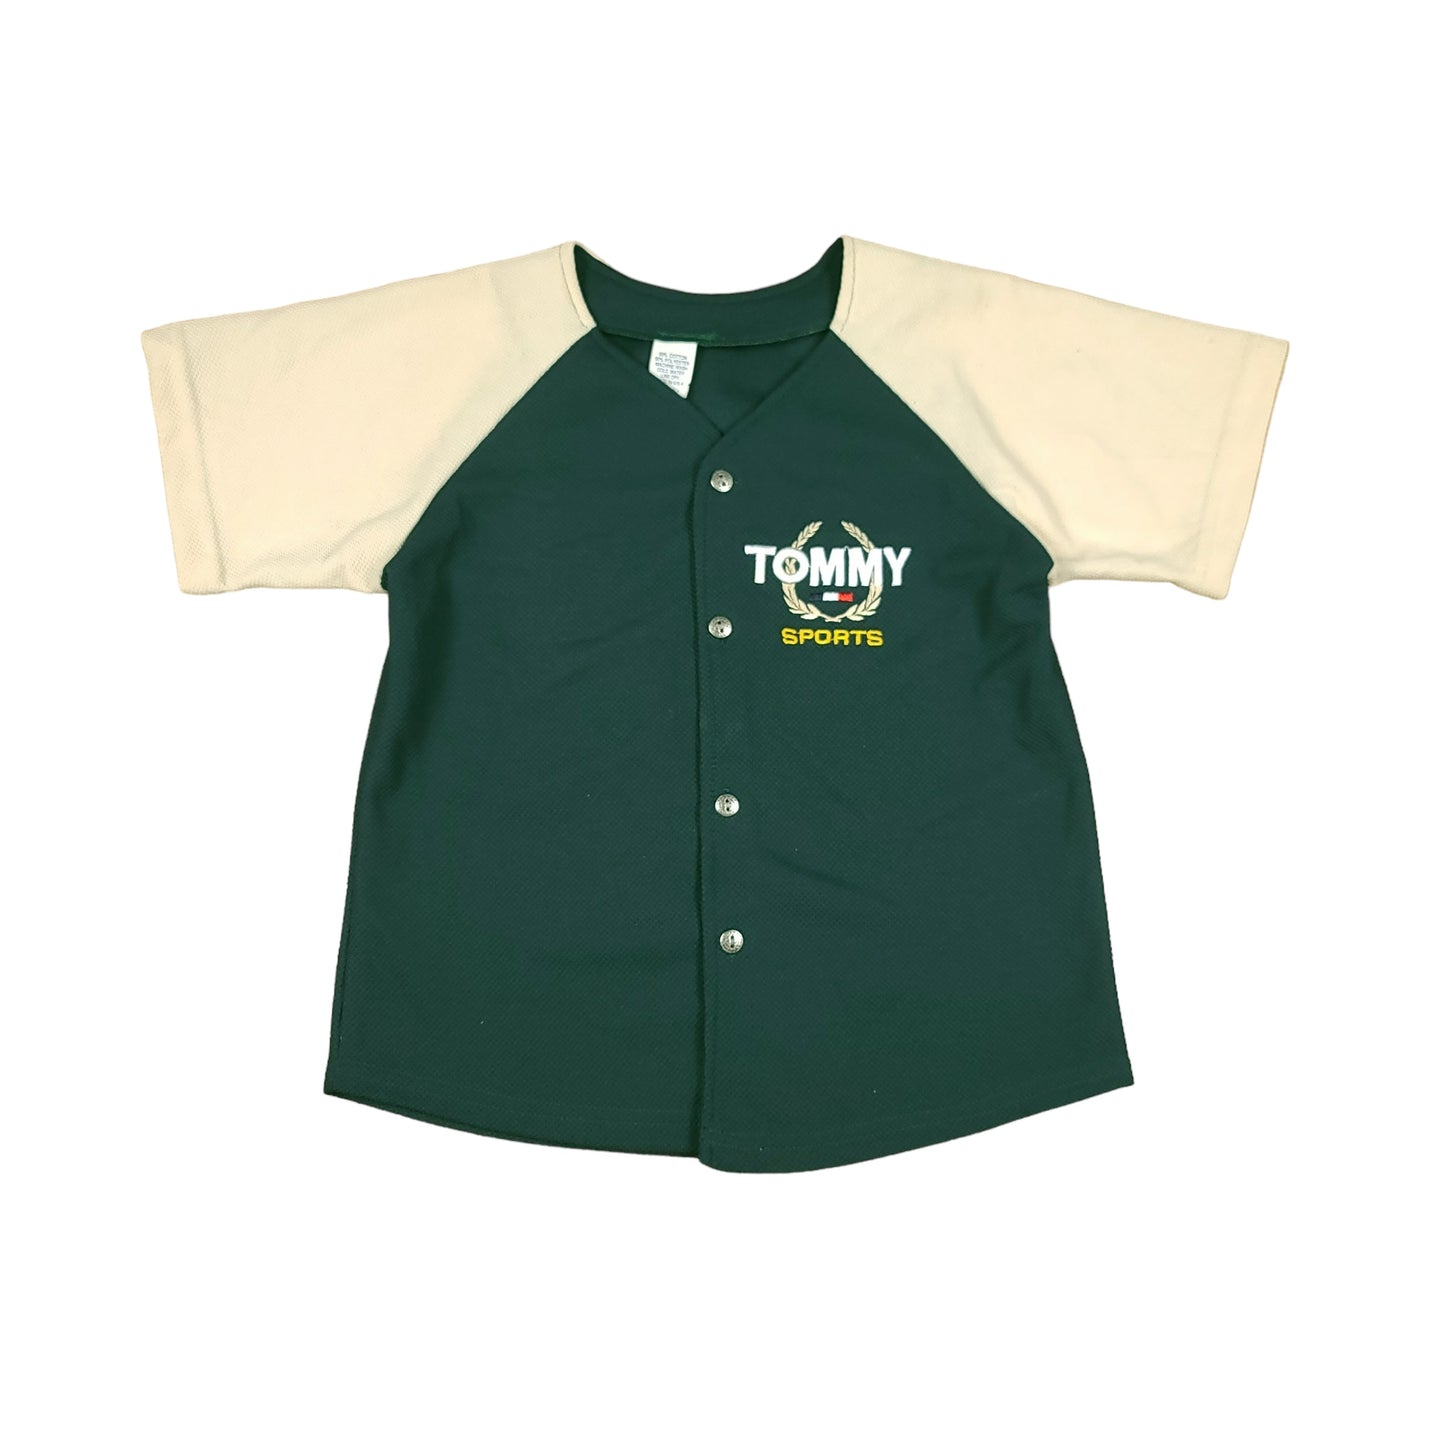 Vintage Green Tommy Sports Youth Jersey